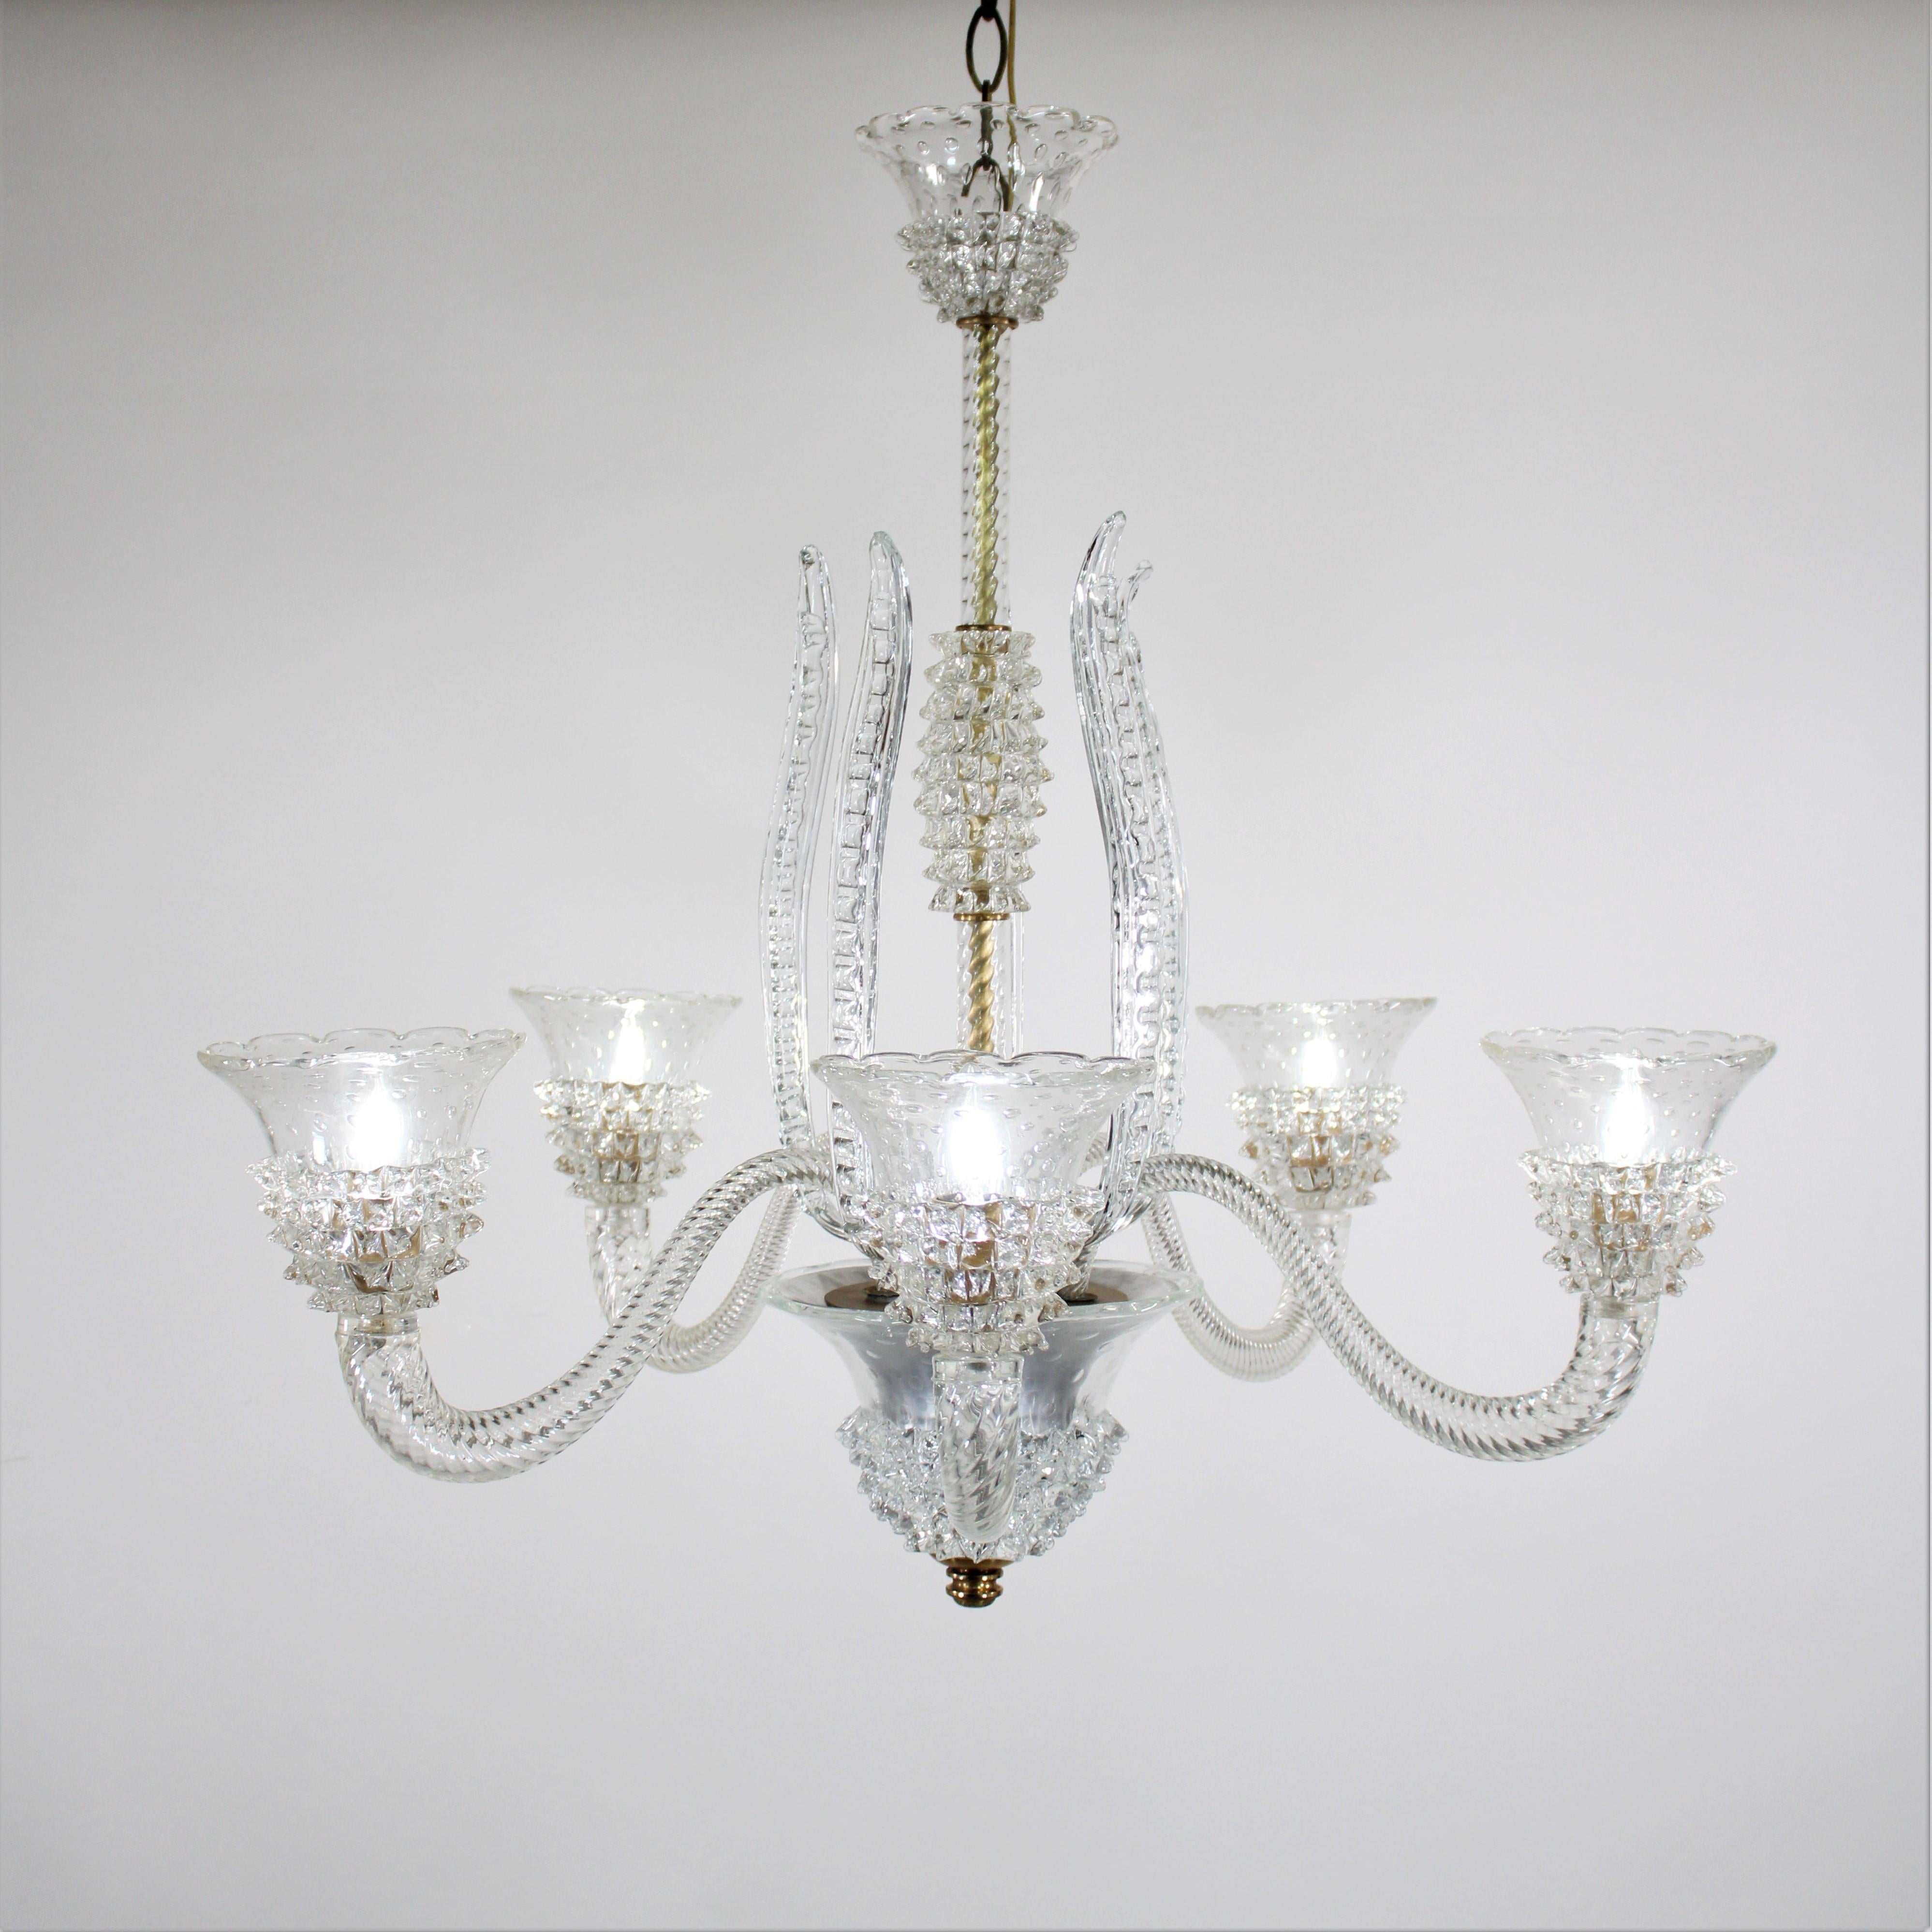 Experience the timeless elegance of this exquisite Murano chandelier, featuring five gracefully scrolling arms adorned with sophisticated glasswork. This piece showcases the renowned bullicante and rostrato techniques, which echo the styles